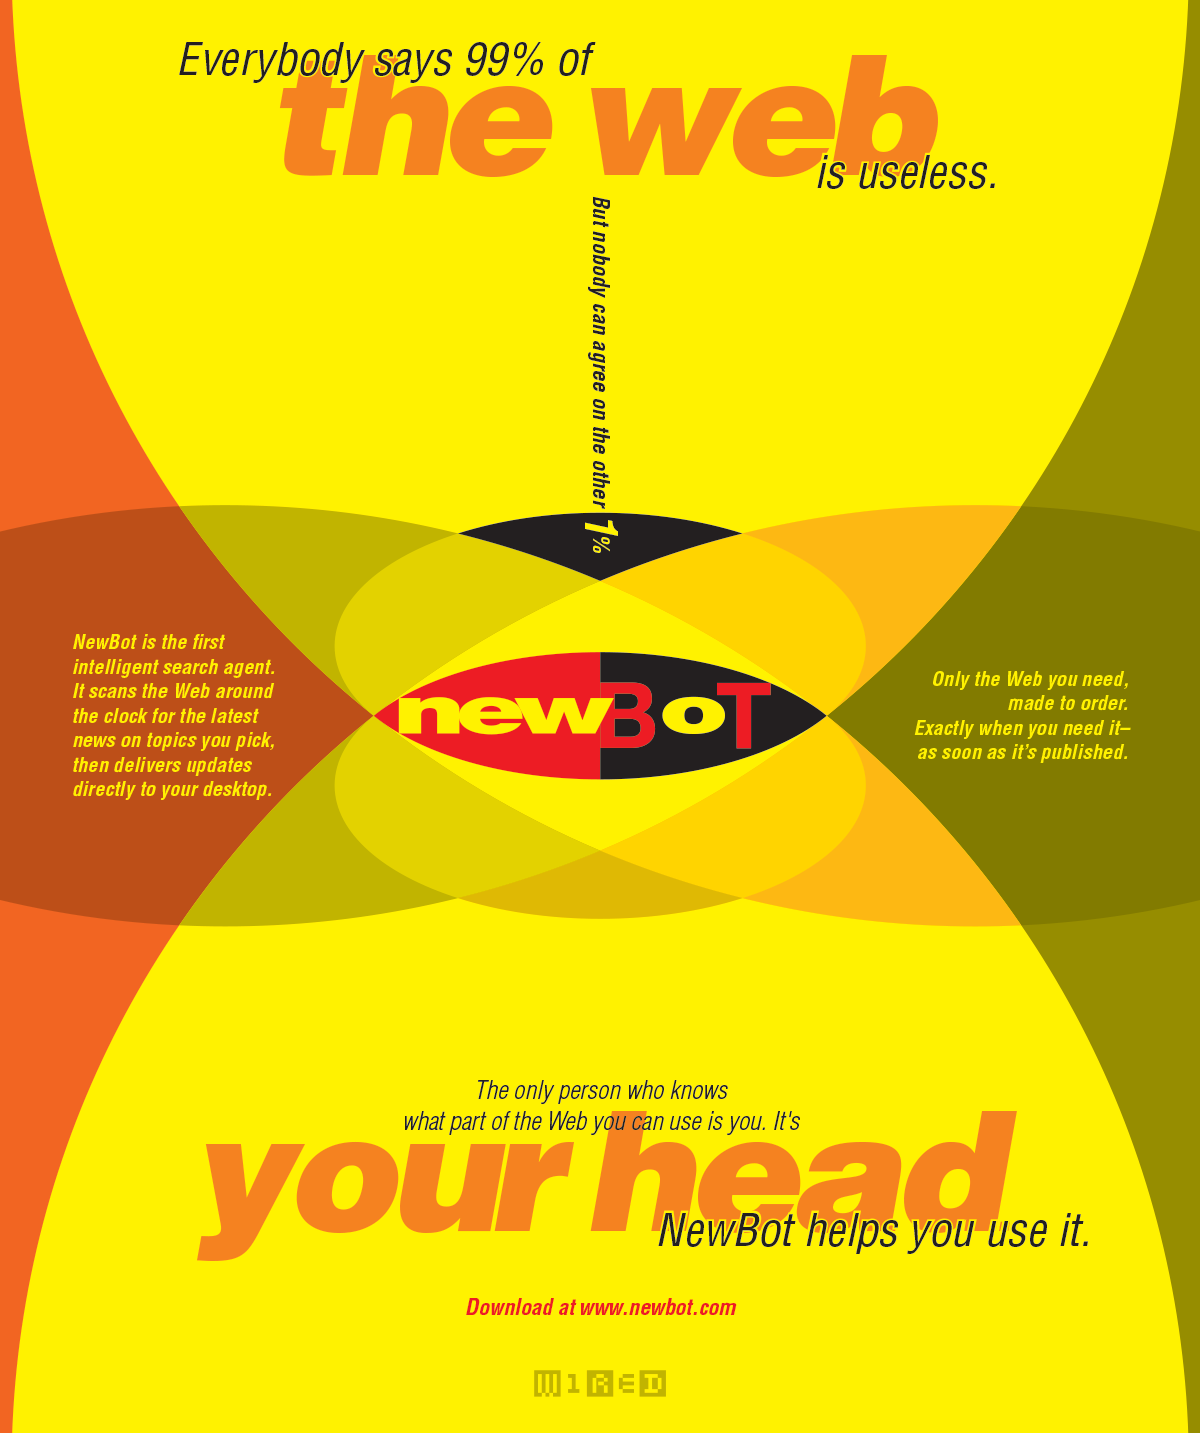 NewBot ad: Everybody says 99% of the Web is useless. The only person who knows what part of the Web you can use is you. It's your head. NewBot helps you use it.